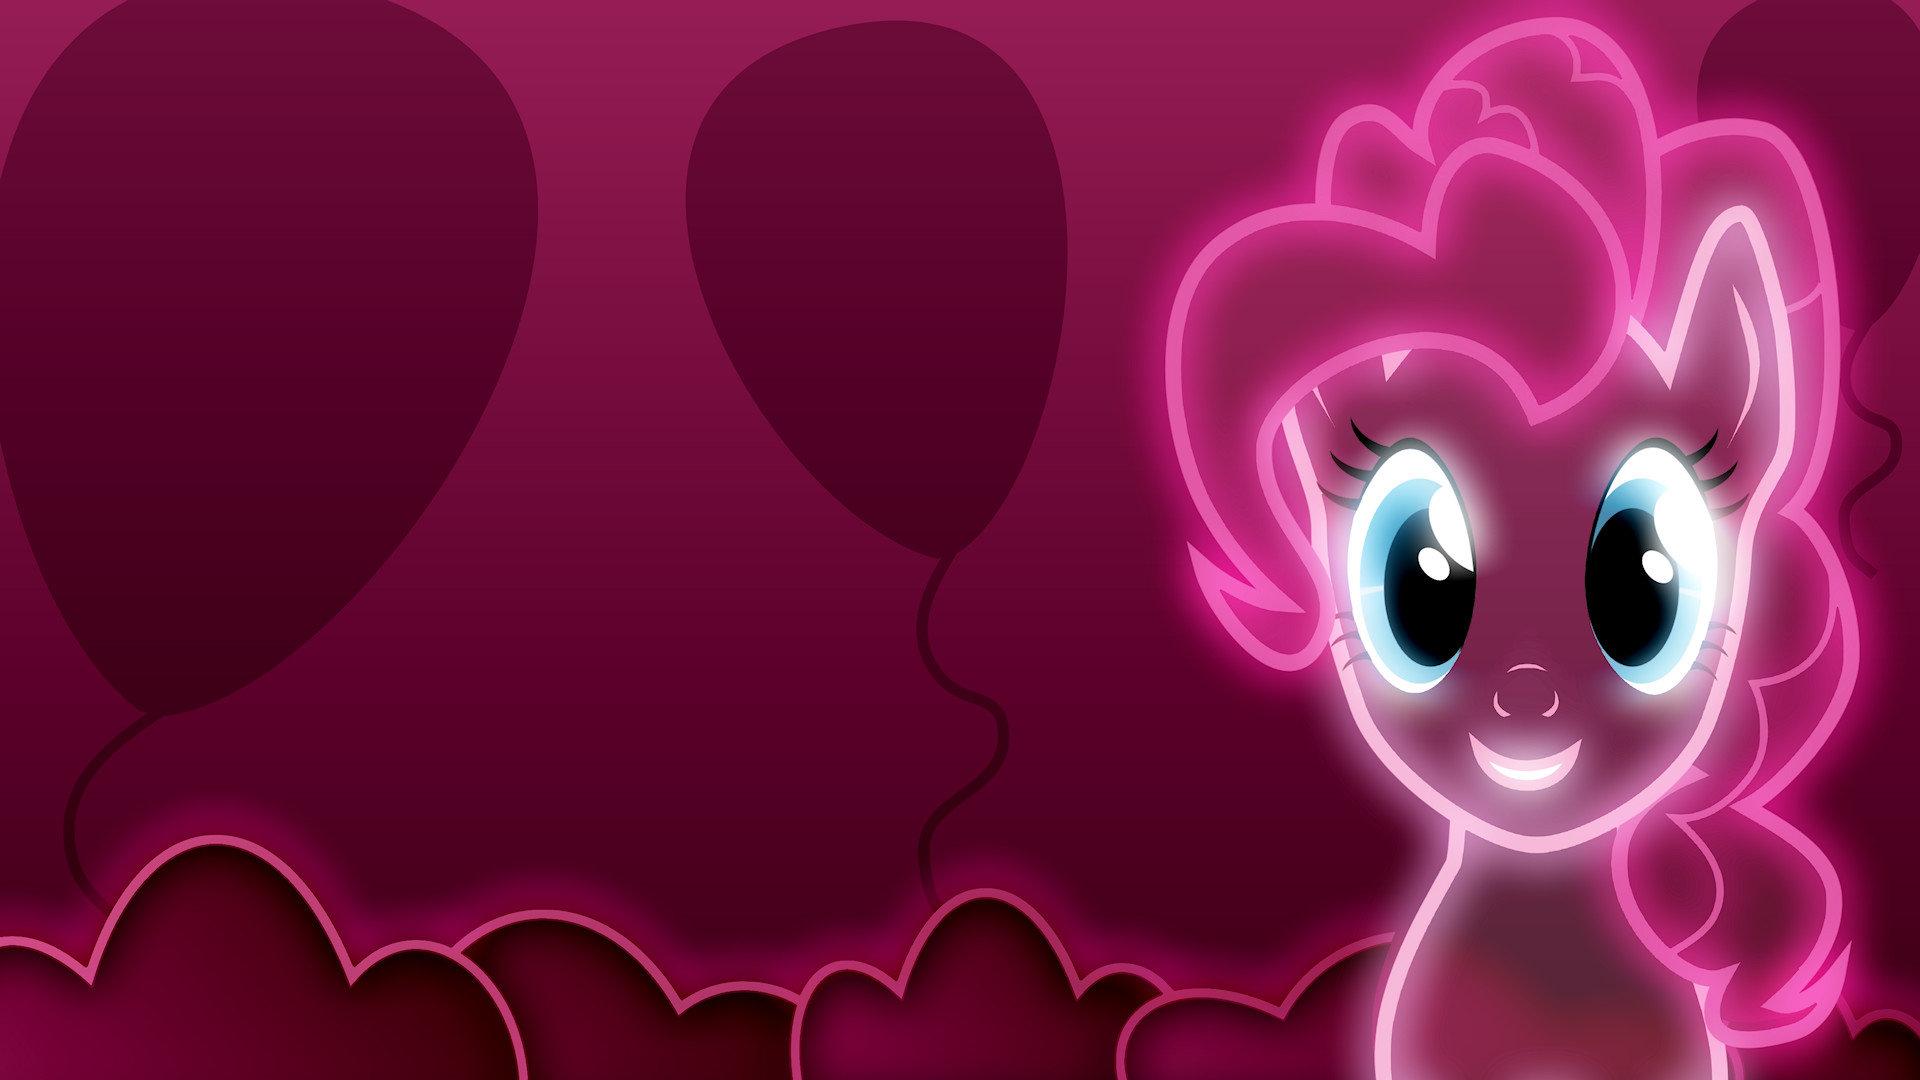 Awesome Pinkie Pie free wallpaper for full HD 1920x1080 PC